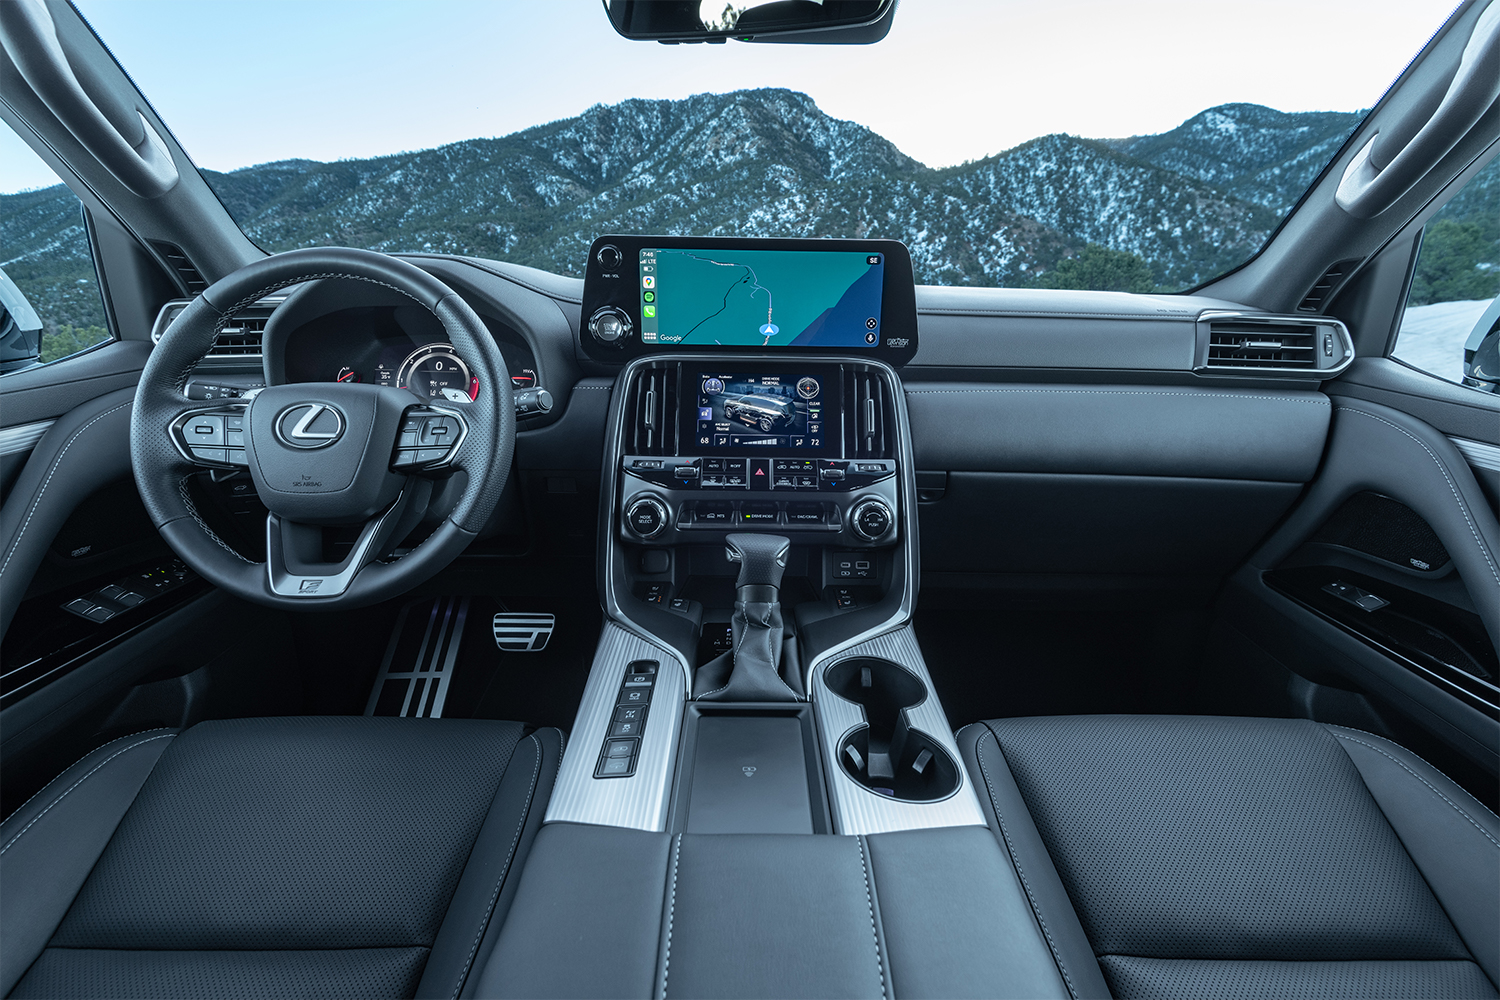 The updated dashboard and infotainment in the new 2022 Lexus LX 600